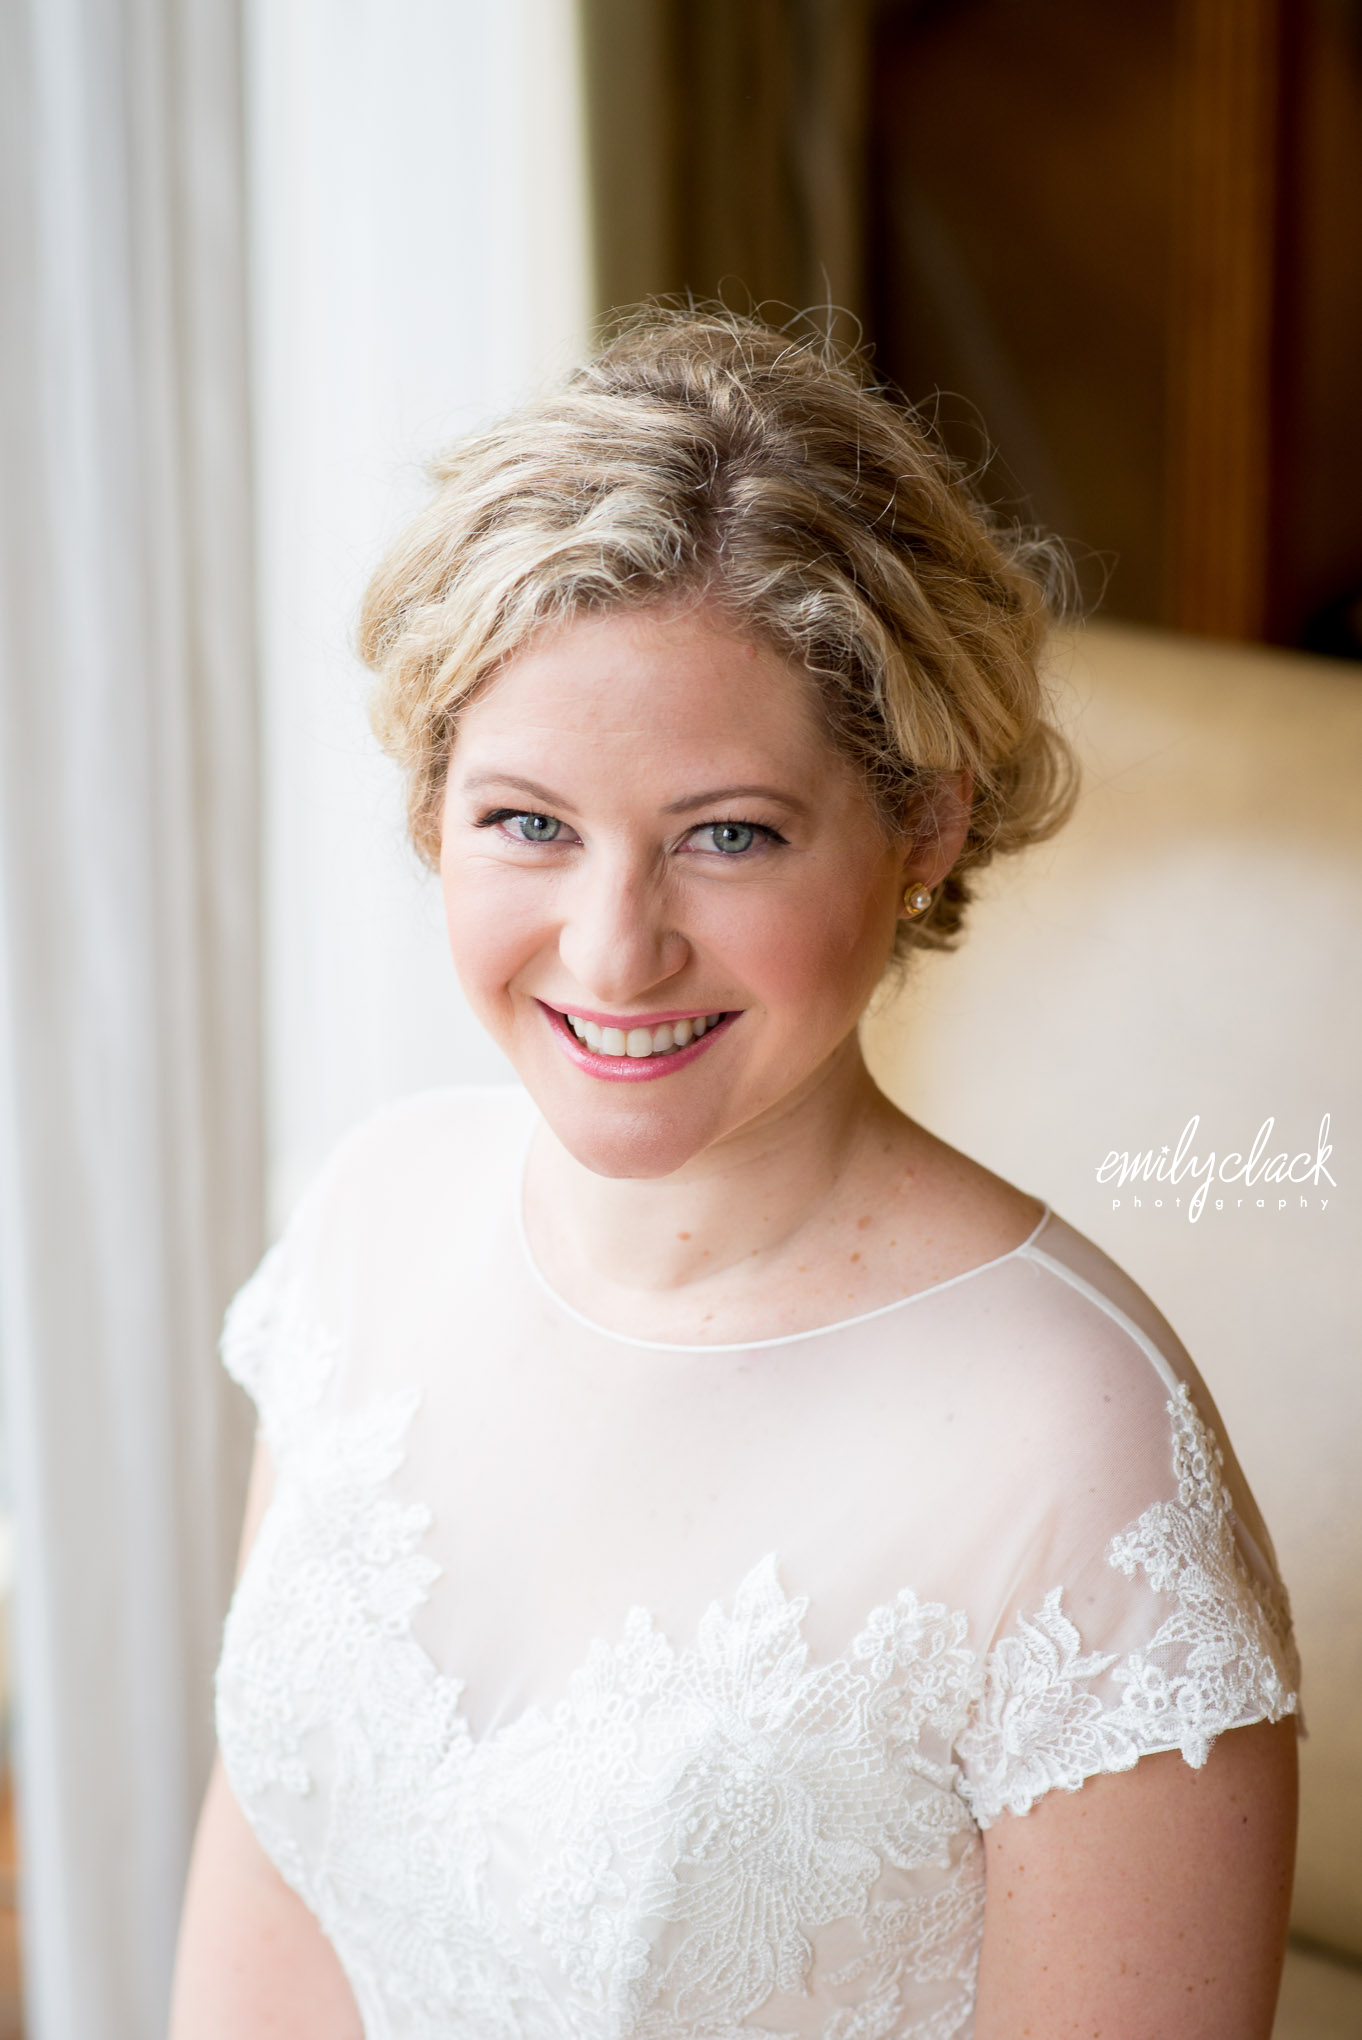   Katie + Doug on July 26, 2014 ♥ Emily Clack Photography at Dahlgren Chapel of the Sacred Heart (Georgetown University)  